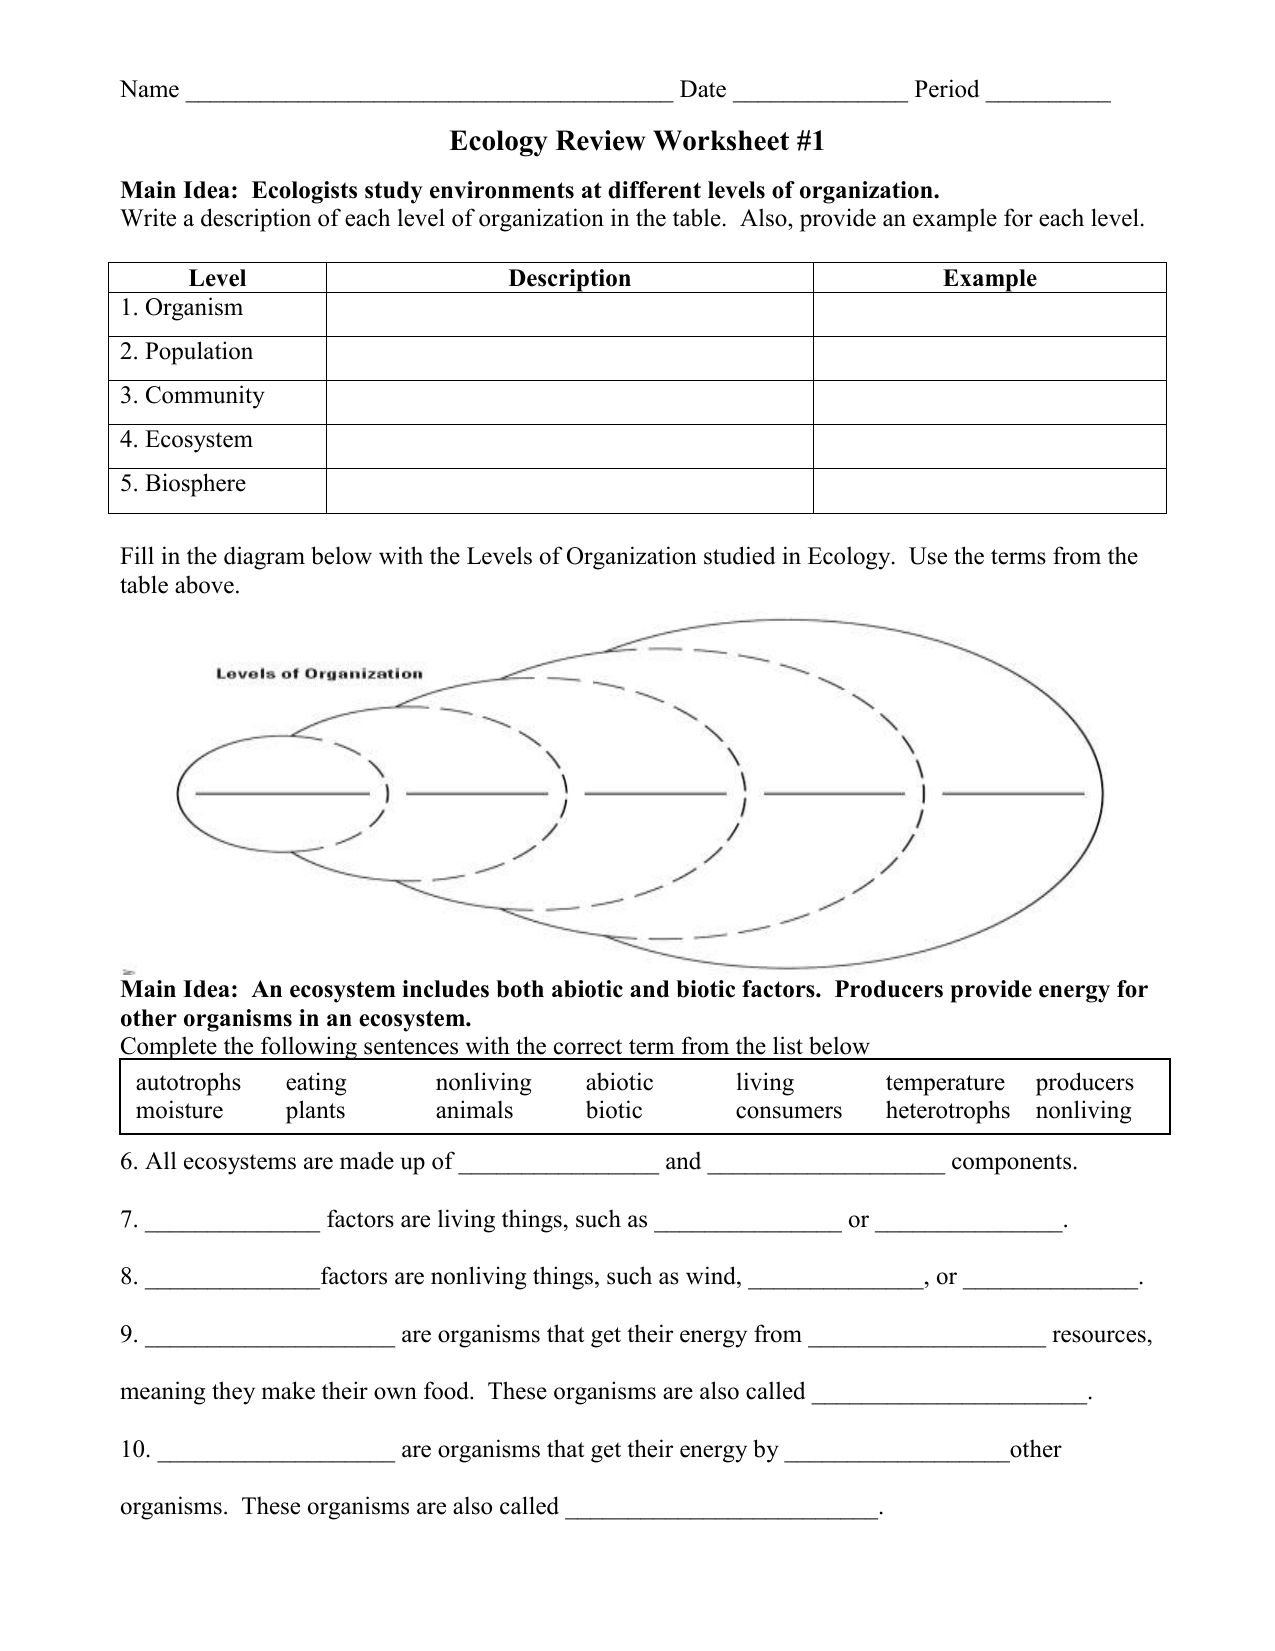 Ecology Review Worksheet 22 For Ecology Review Worksheet 1